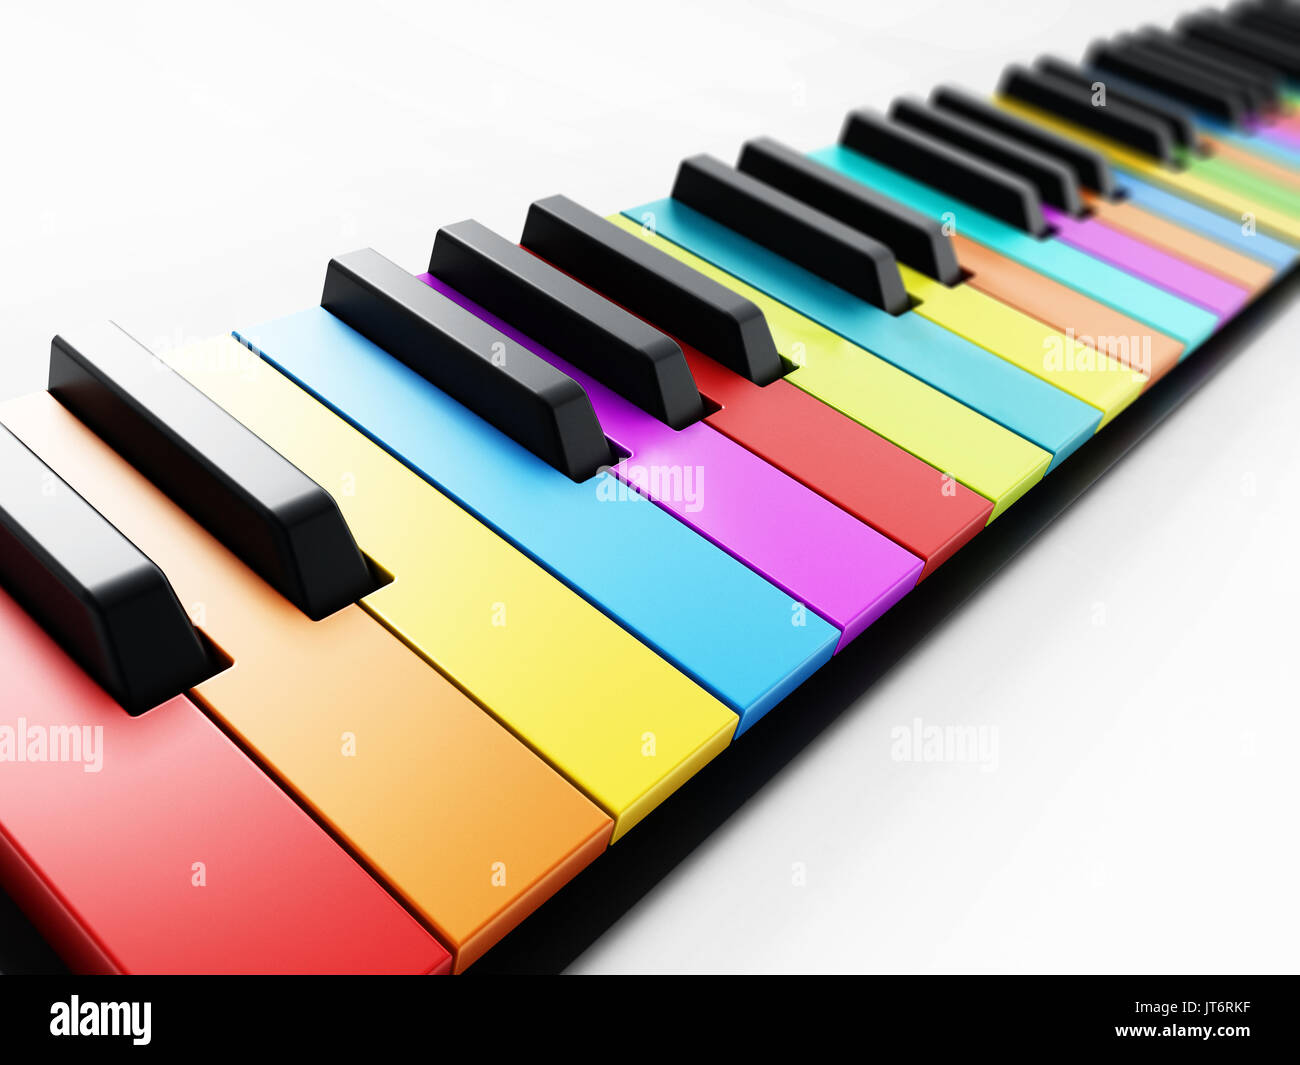 3d Render Of Piano Keys Stock Photo, Picture and Royalty Free